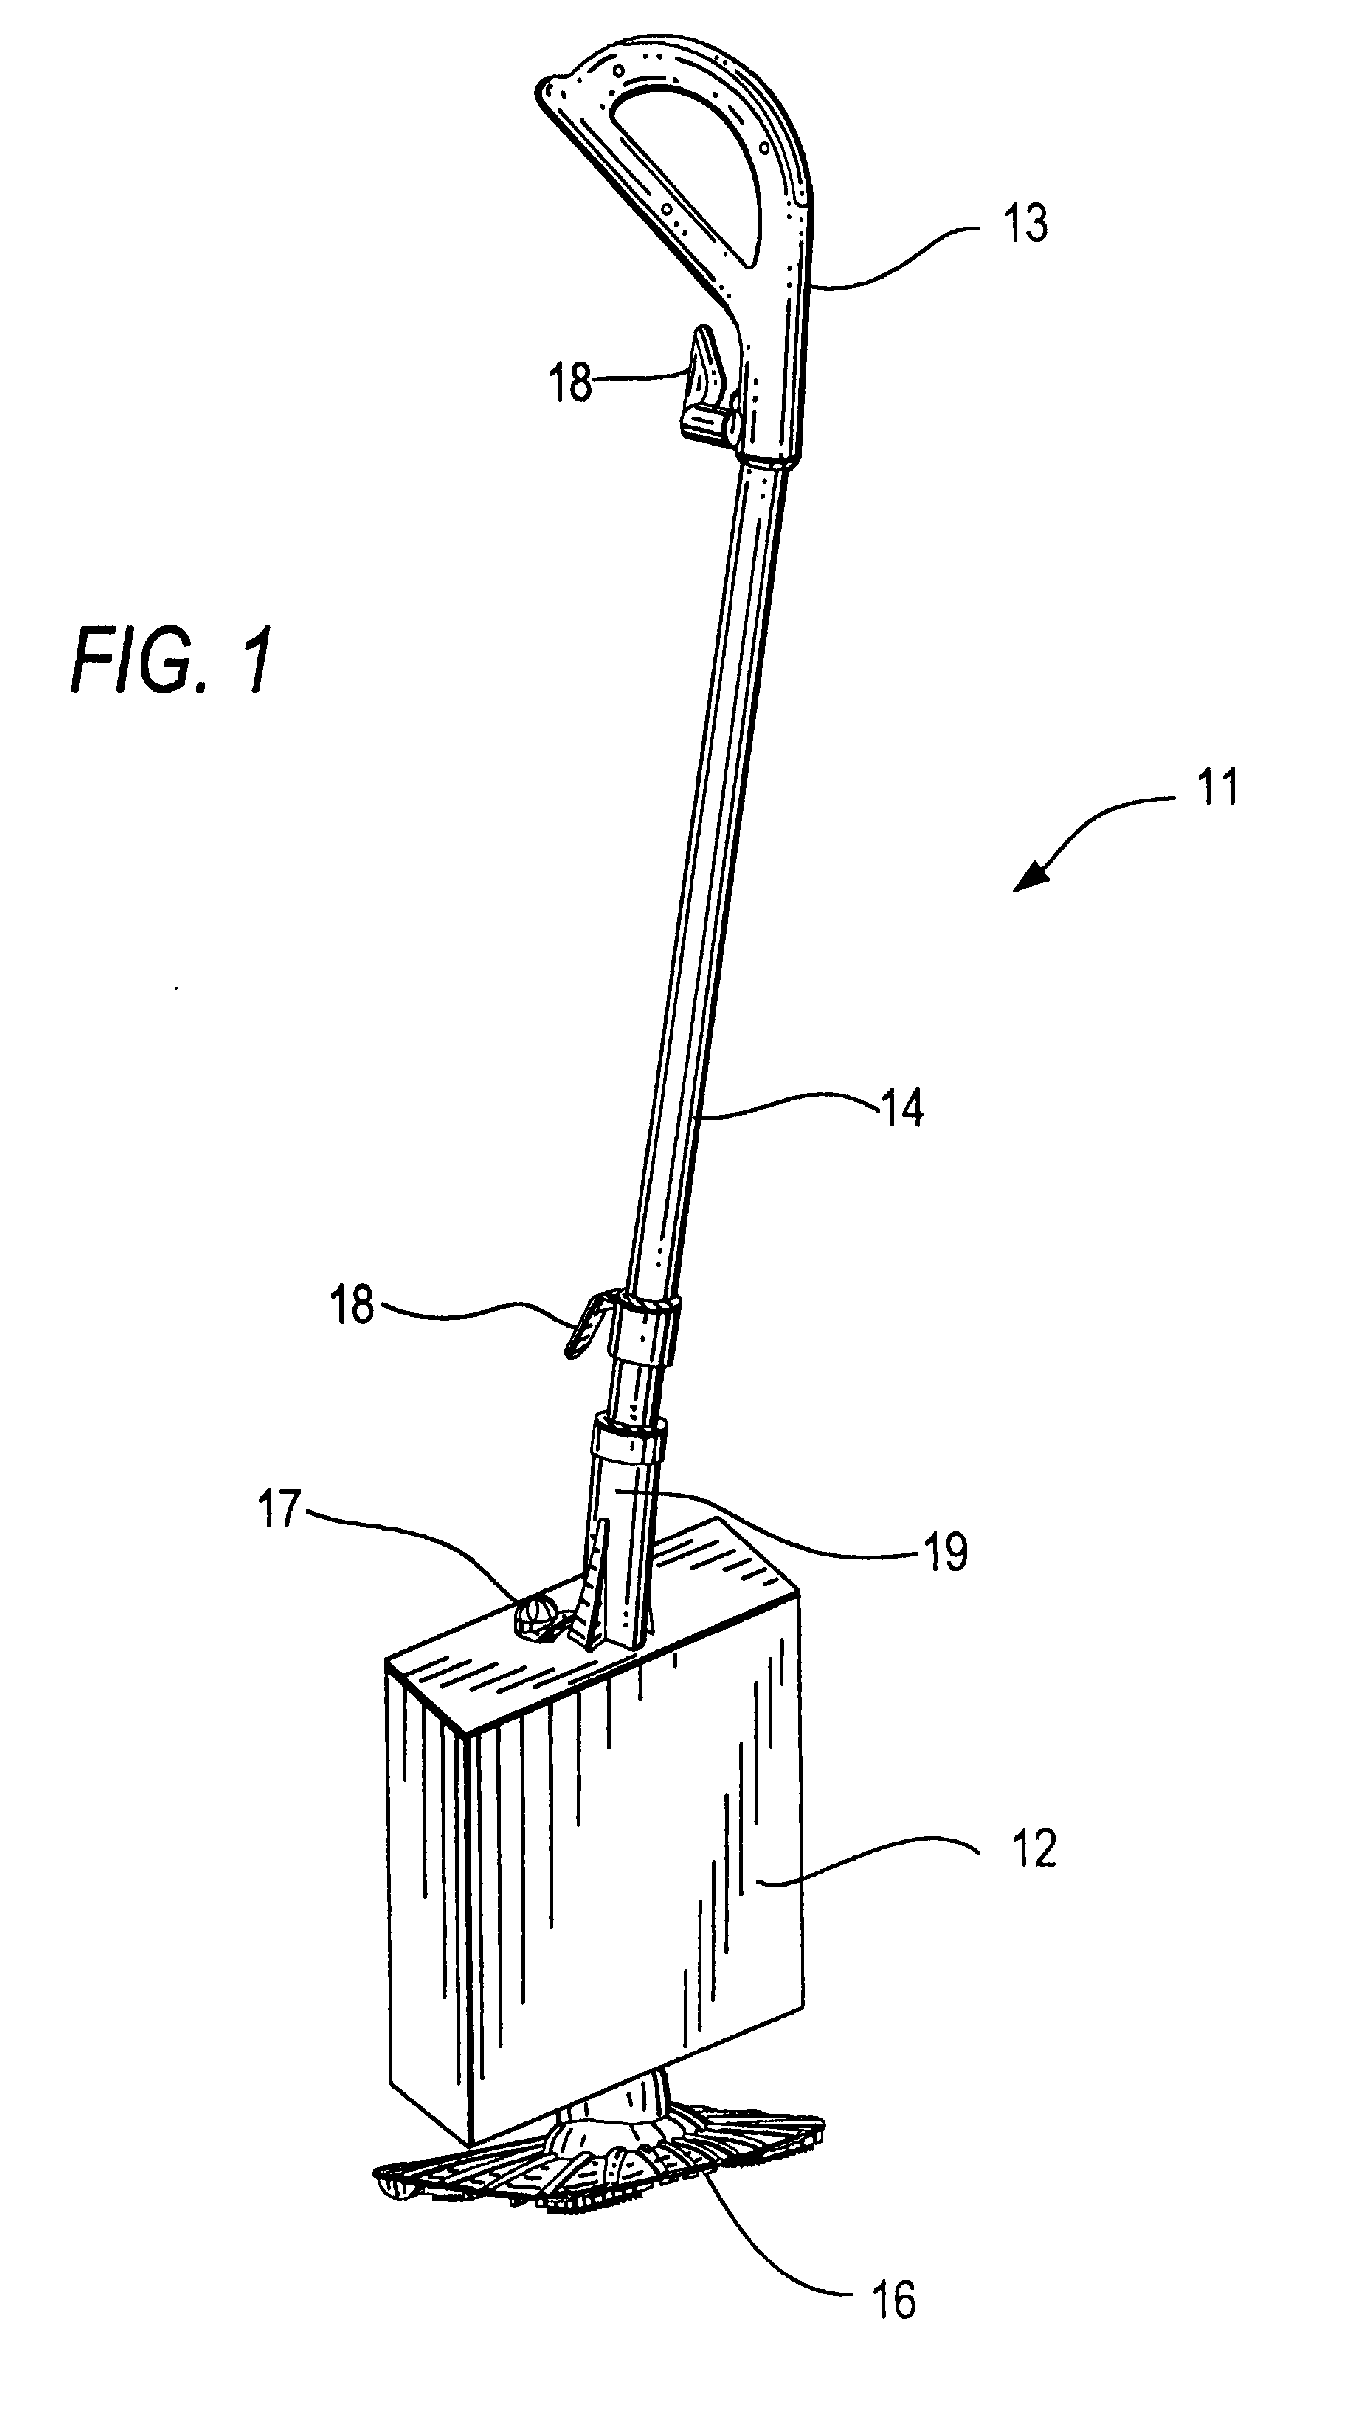 Multi-directional actuator for a pump